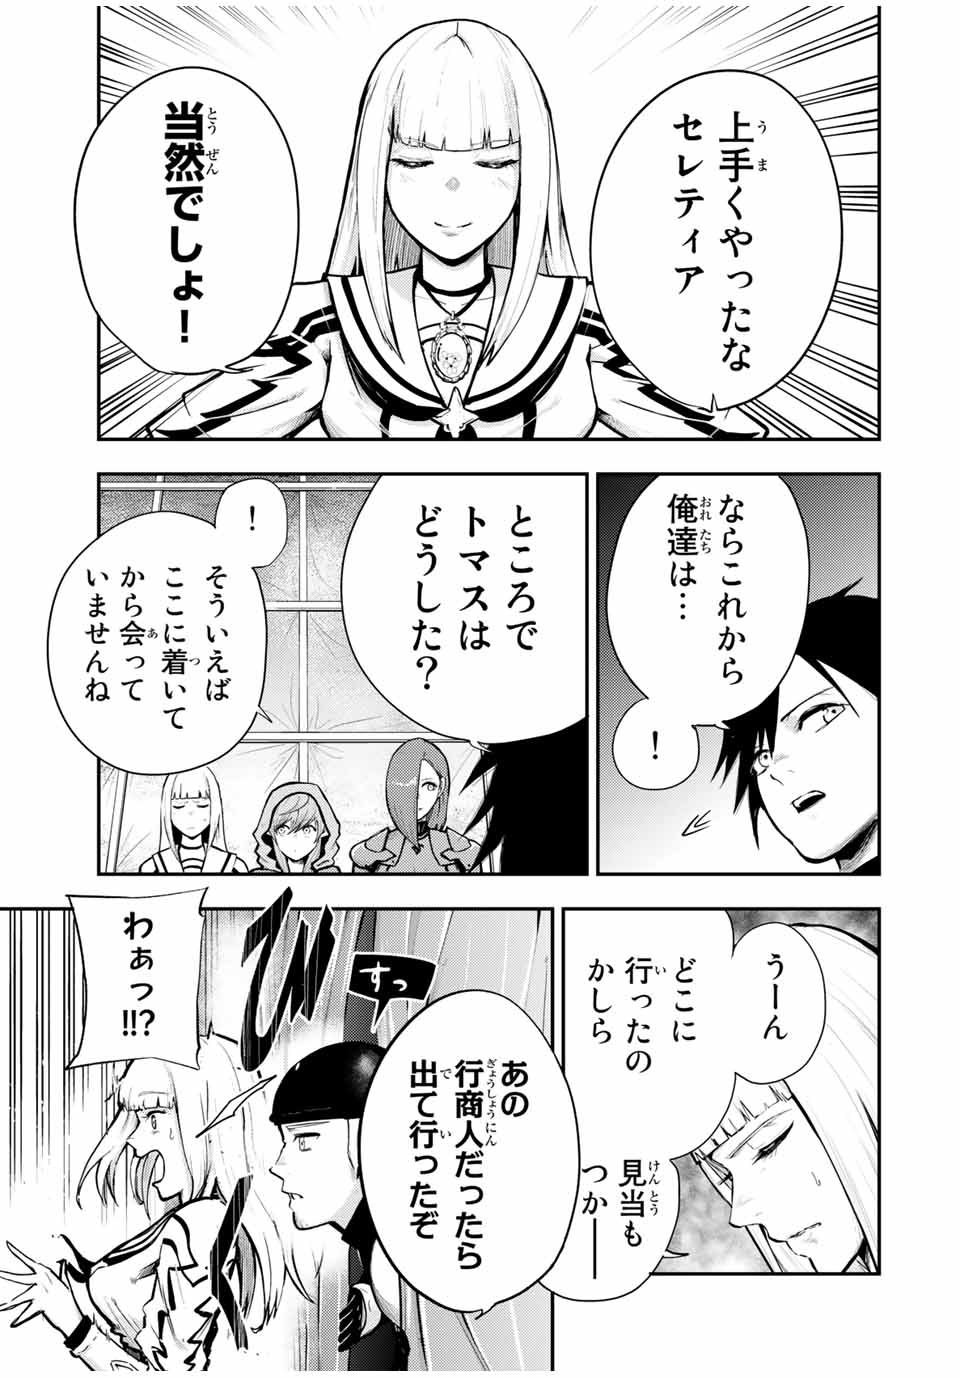 the strongest former prince-; 奴隷転生 ～その奴隷、最強の元王子につき～ 第32話 - Page 5